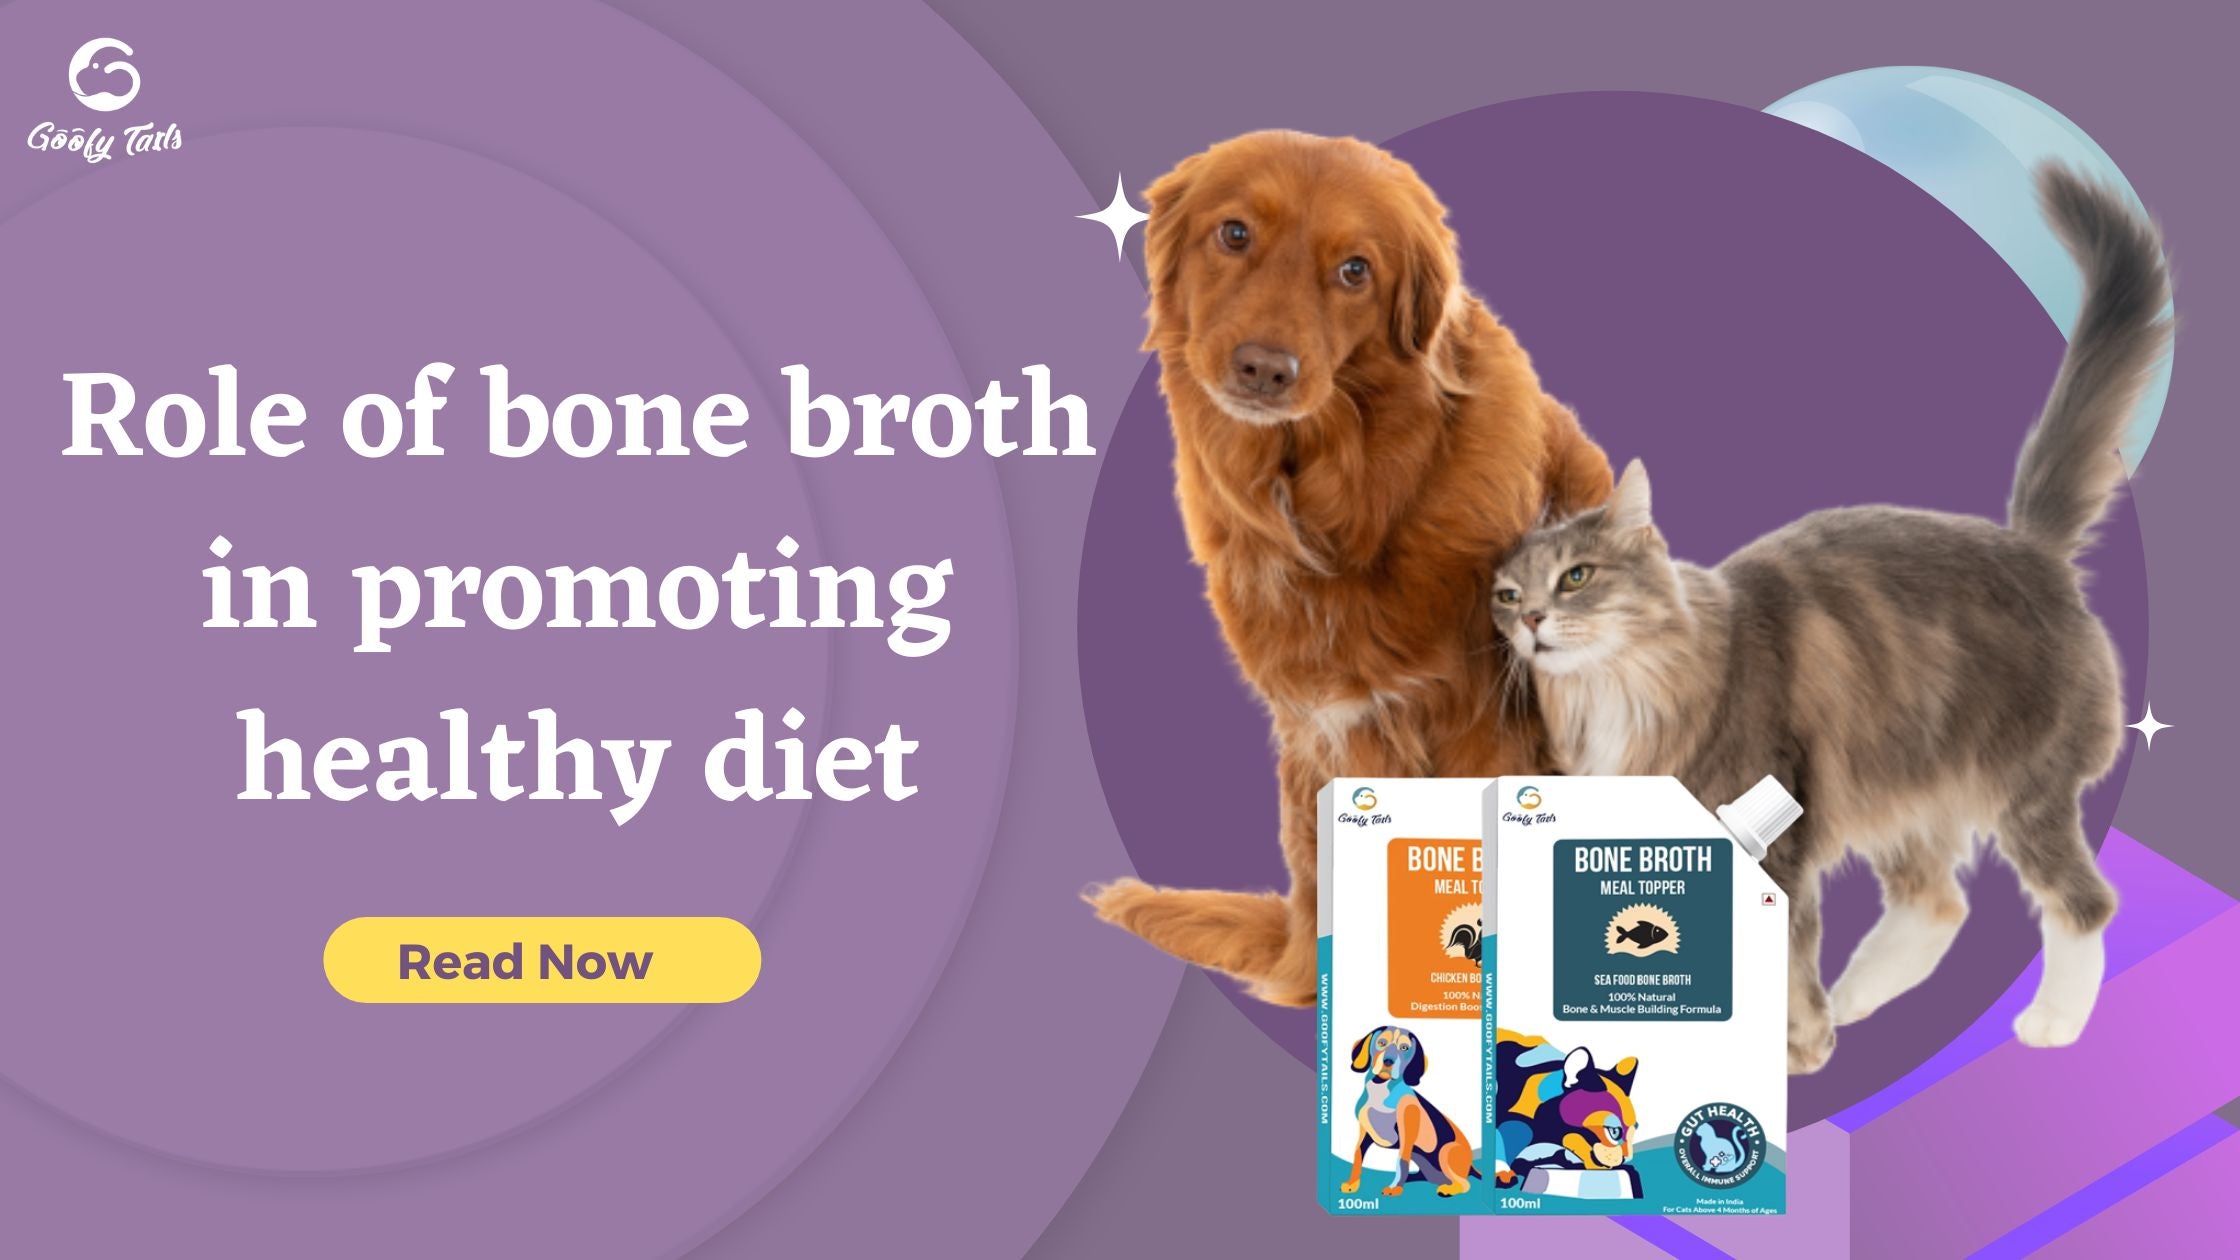 Role of bone broth in promoting healthy diet